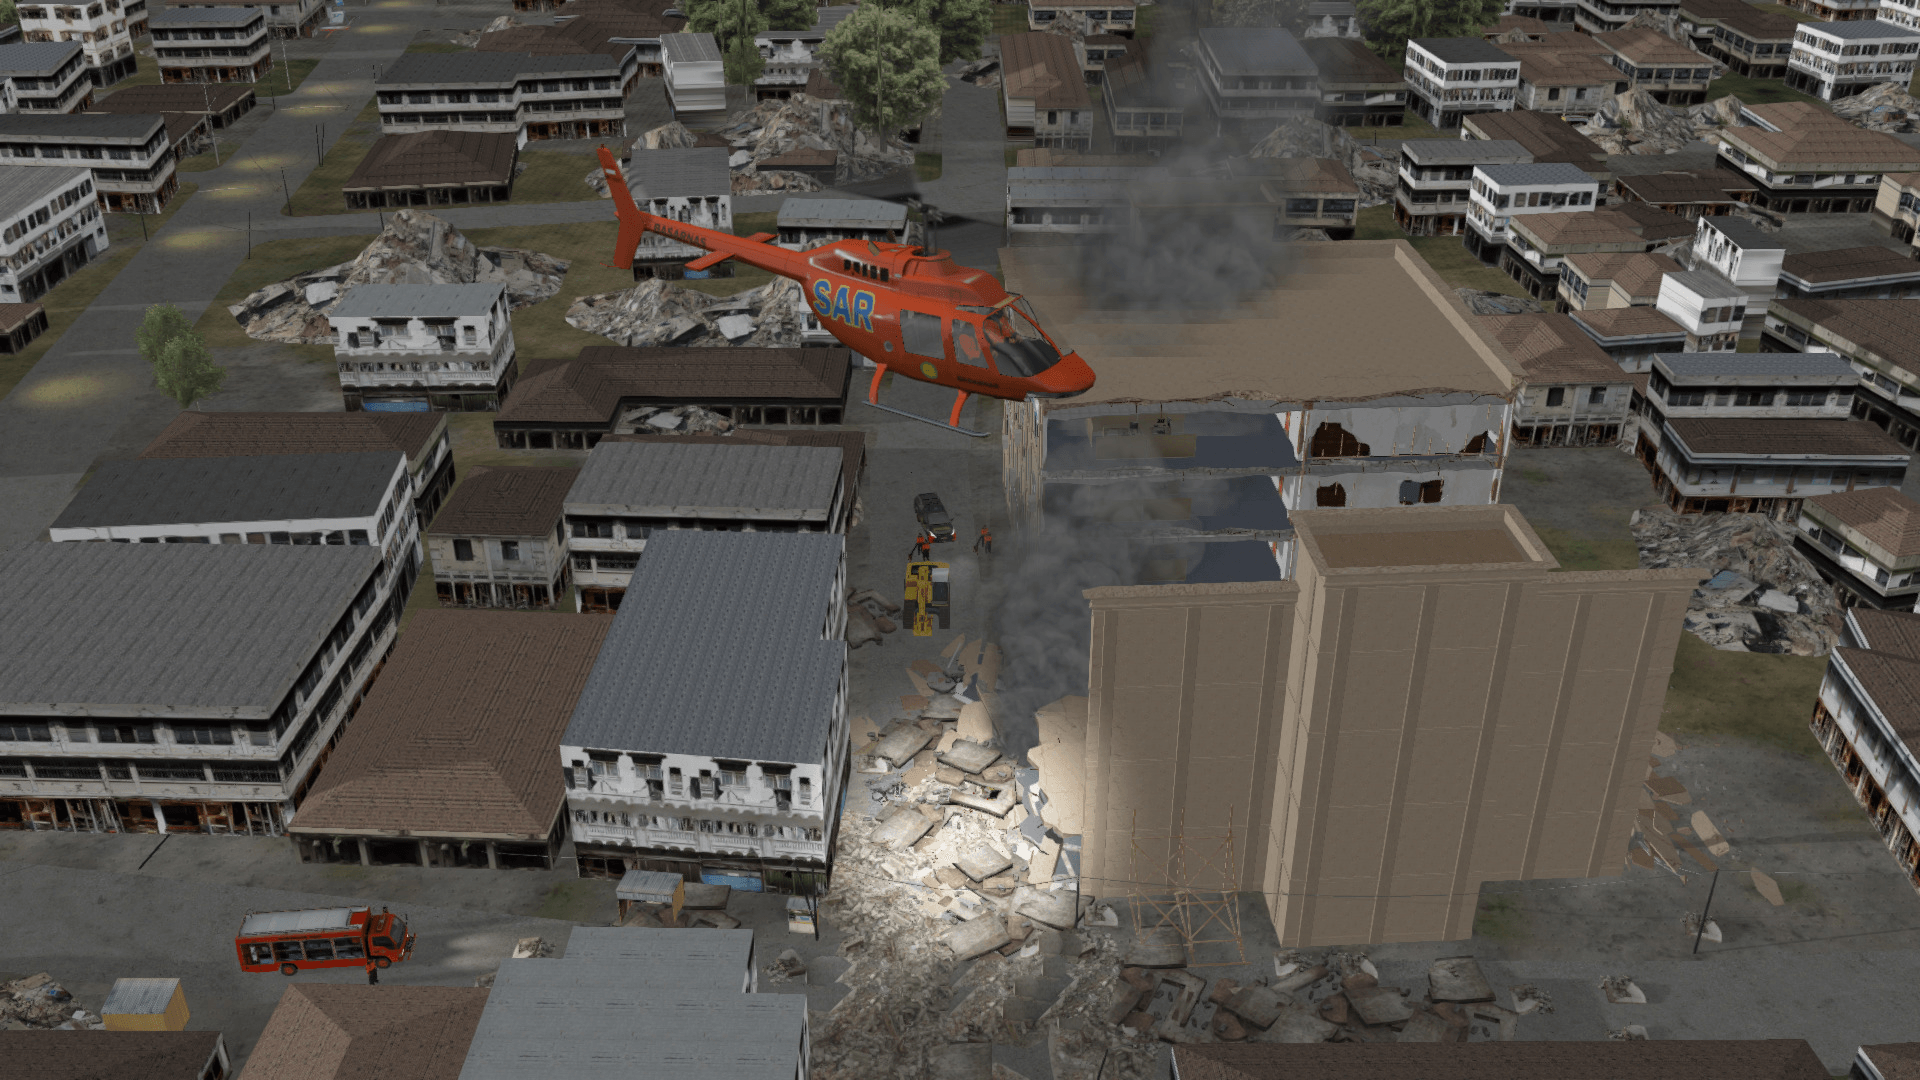 Search and Rescue helicopter above a wrecked area to support ground forces in searching survivors during simulation training.